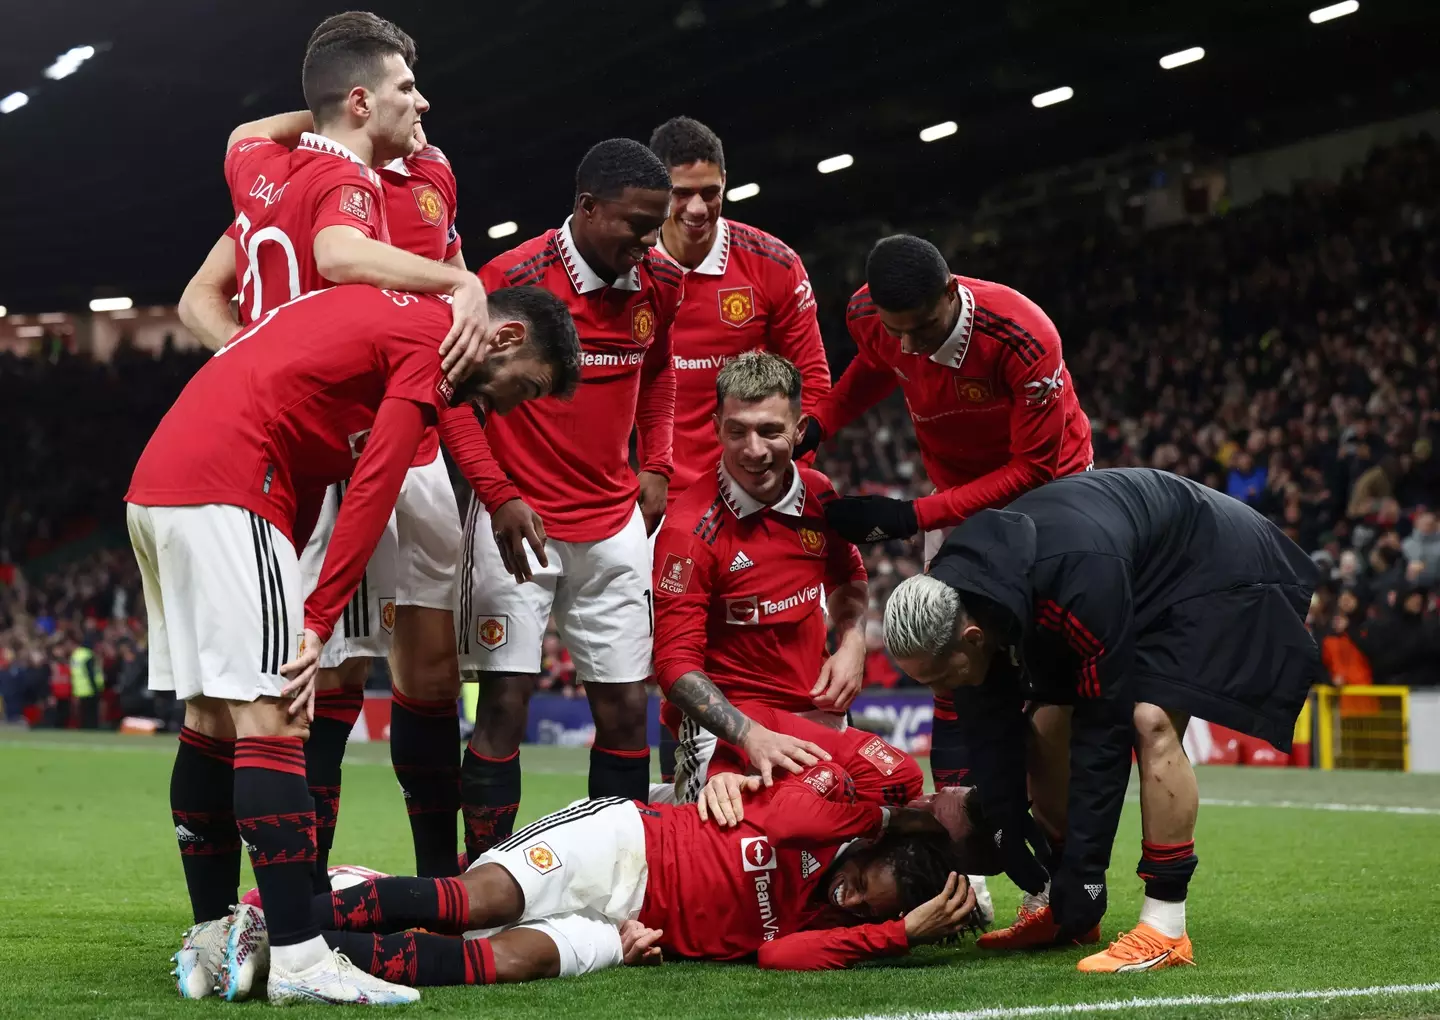 Manchester United players celebrate scoring a goal against West Ham. Image: Alamy 